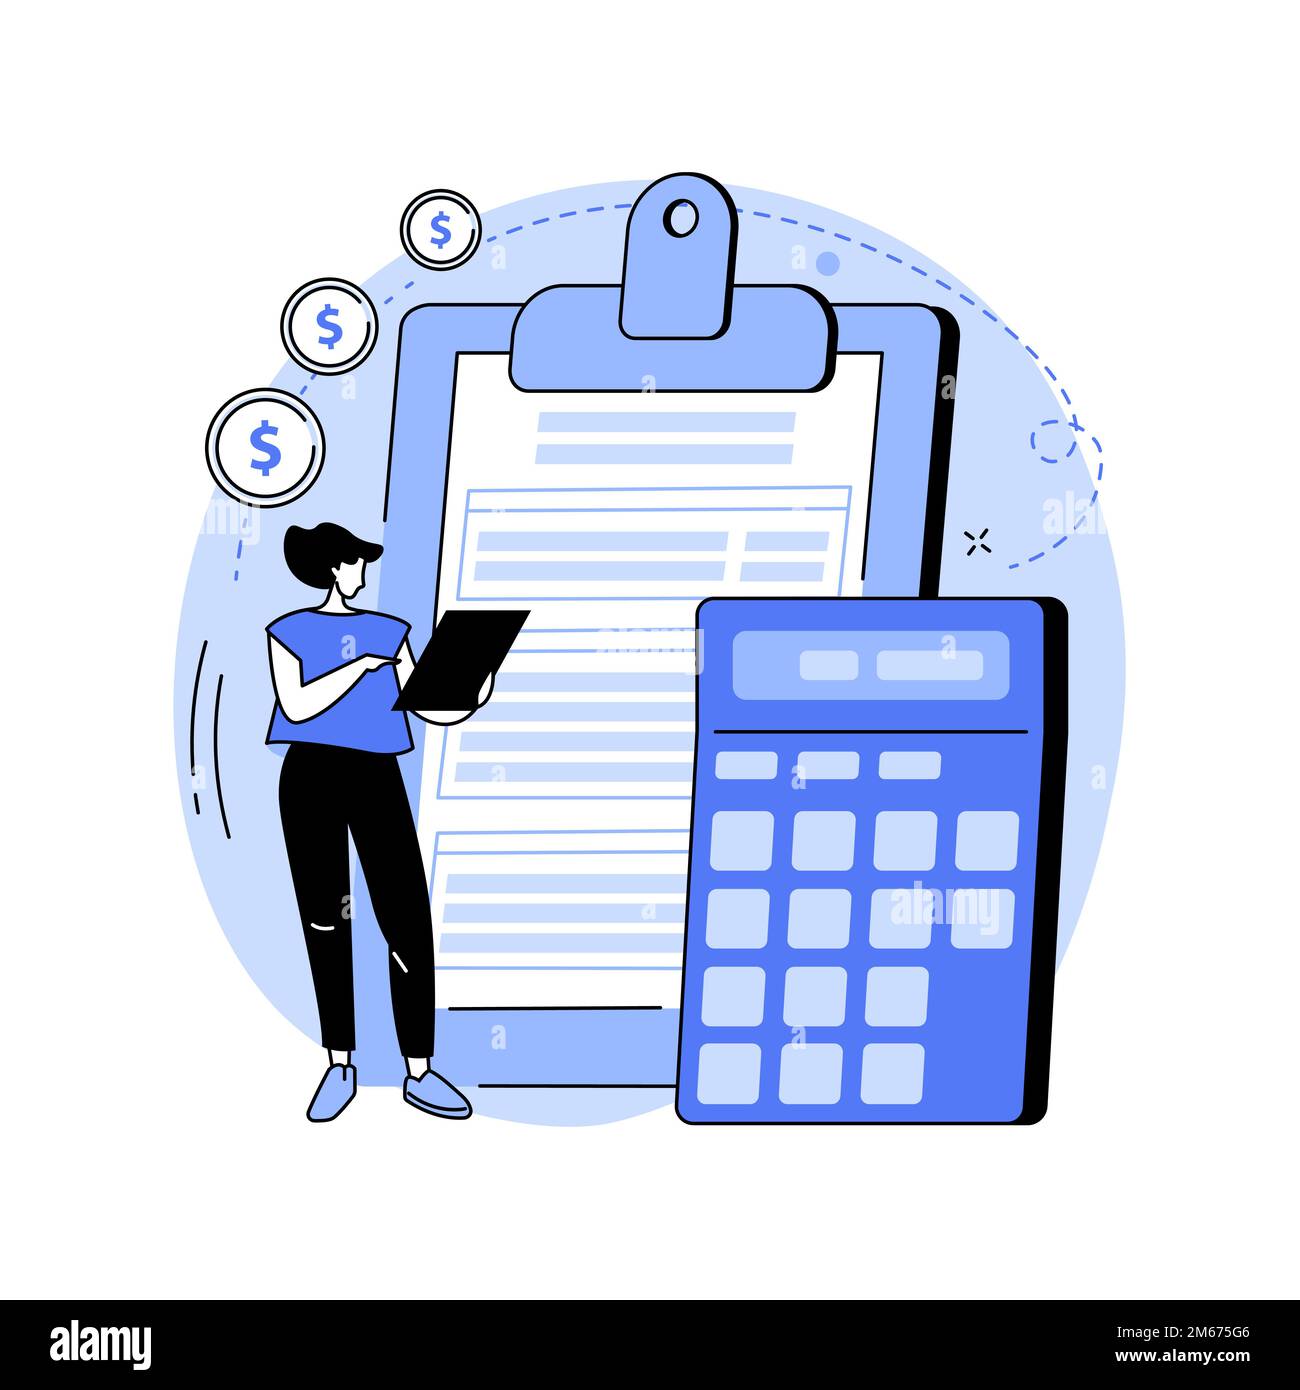 Doing your taxes abstract concept vector illustration. Personal income, refinance your debt, loan insurance, budget calculator, business accountant, f Stock Vector